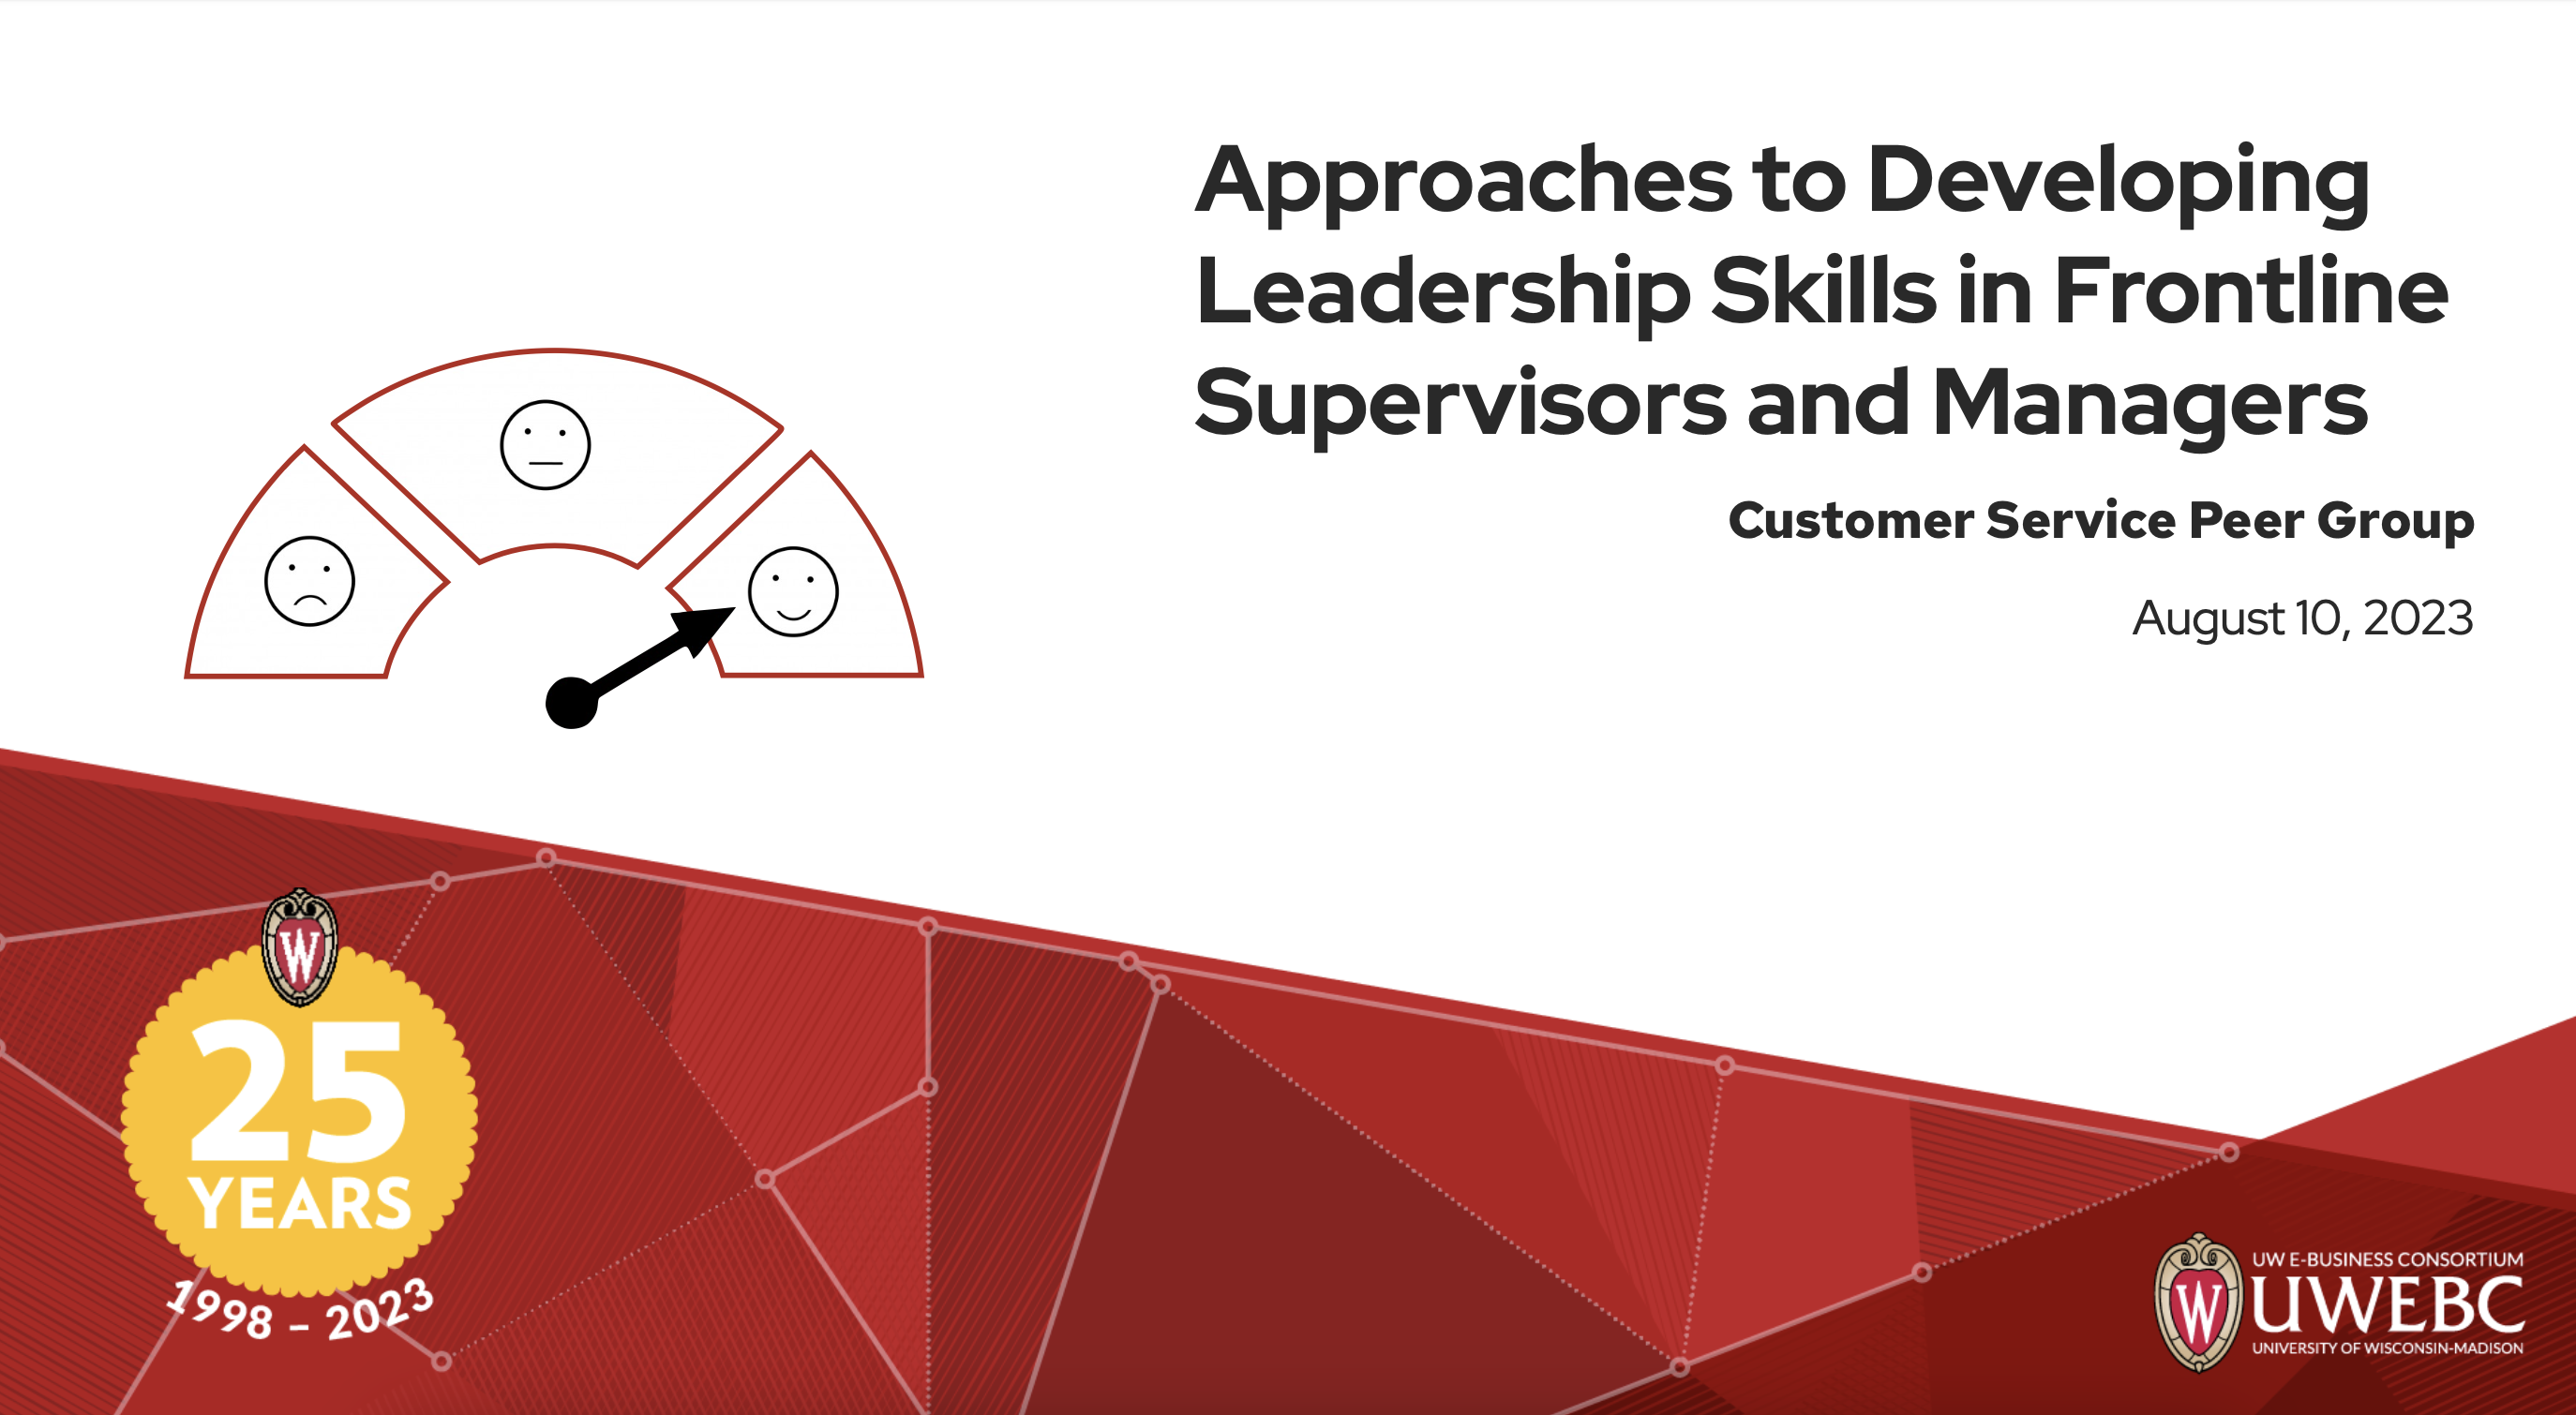 2. UWEBC Presentation Slides: Approaches to Developing Leadership Skills in Frontline Supervisors and Managers thumbnail